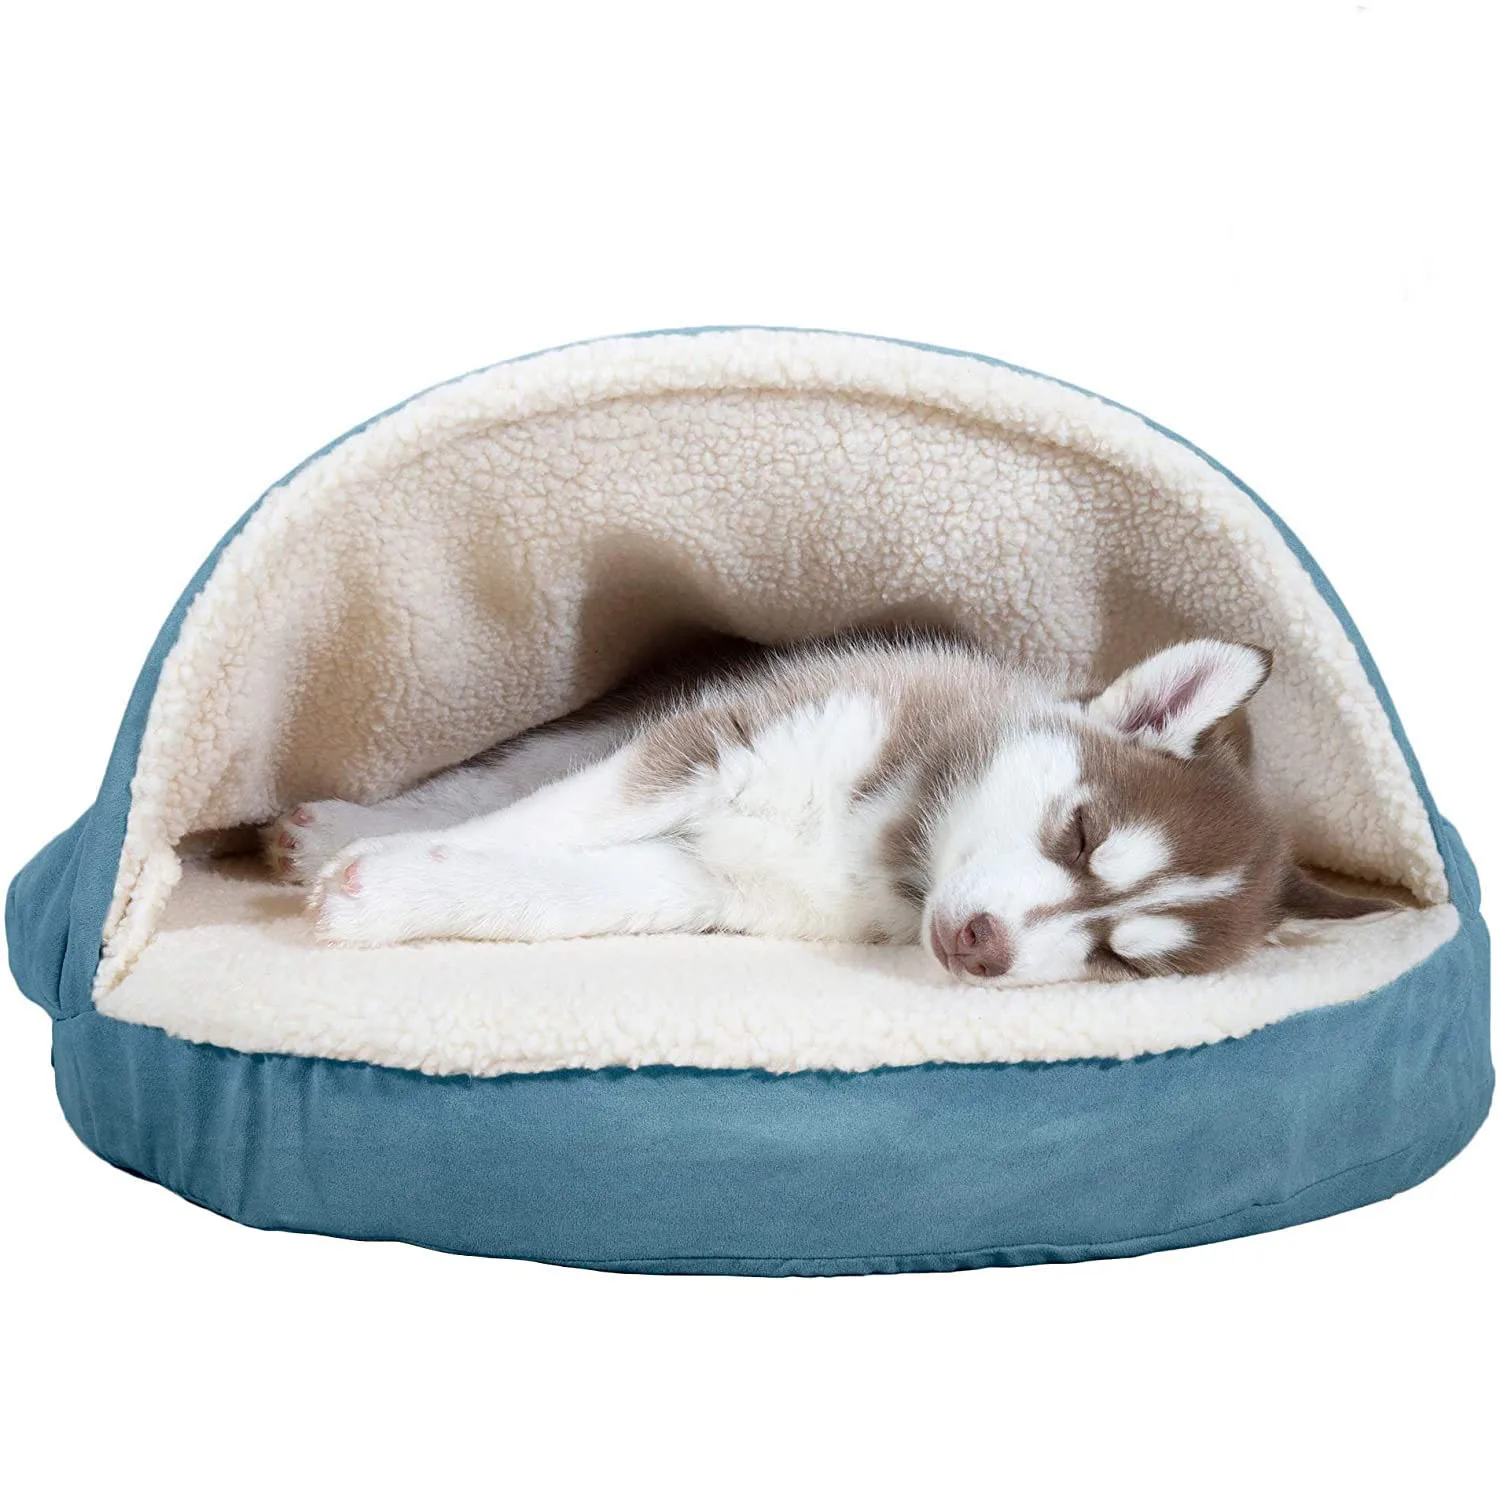 Round Orthopedic Snuggery Blanket Burrowing Cave Convertible Hood Dog Bed For Dogs - Buy Dog Bed,Round Dog Bed,Foldable Convertible Product on Alibaba.com